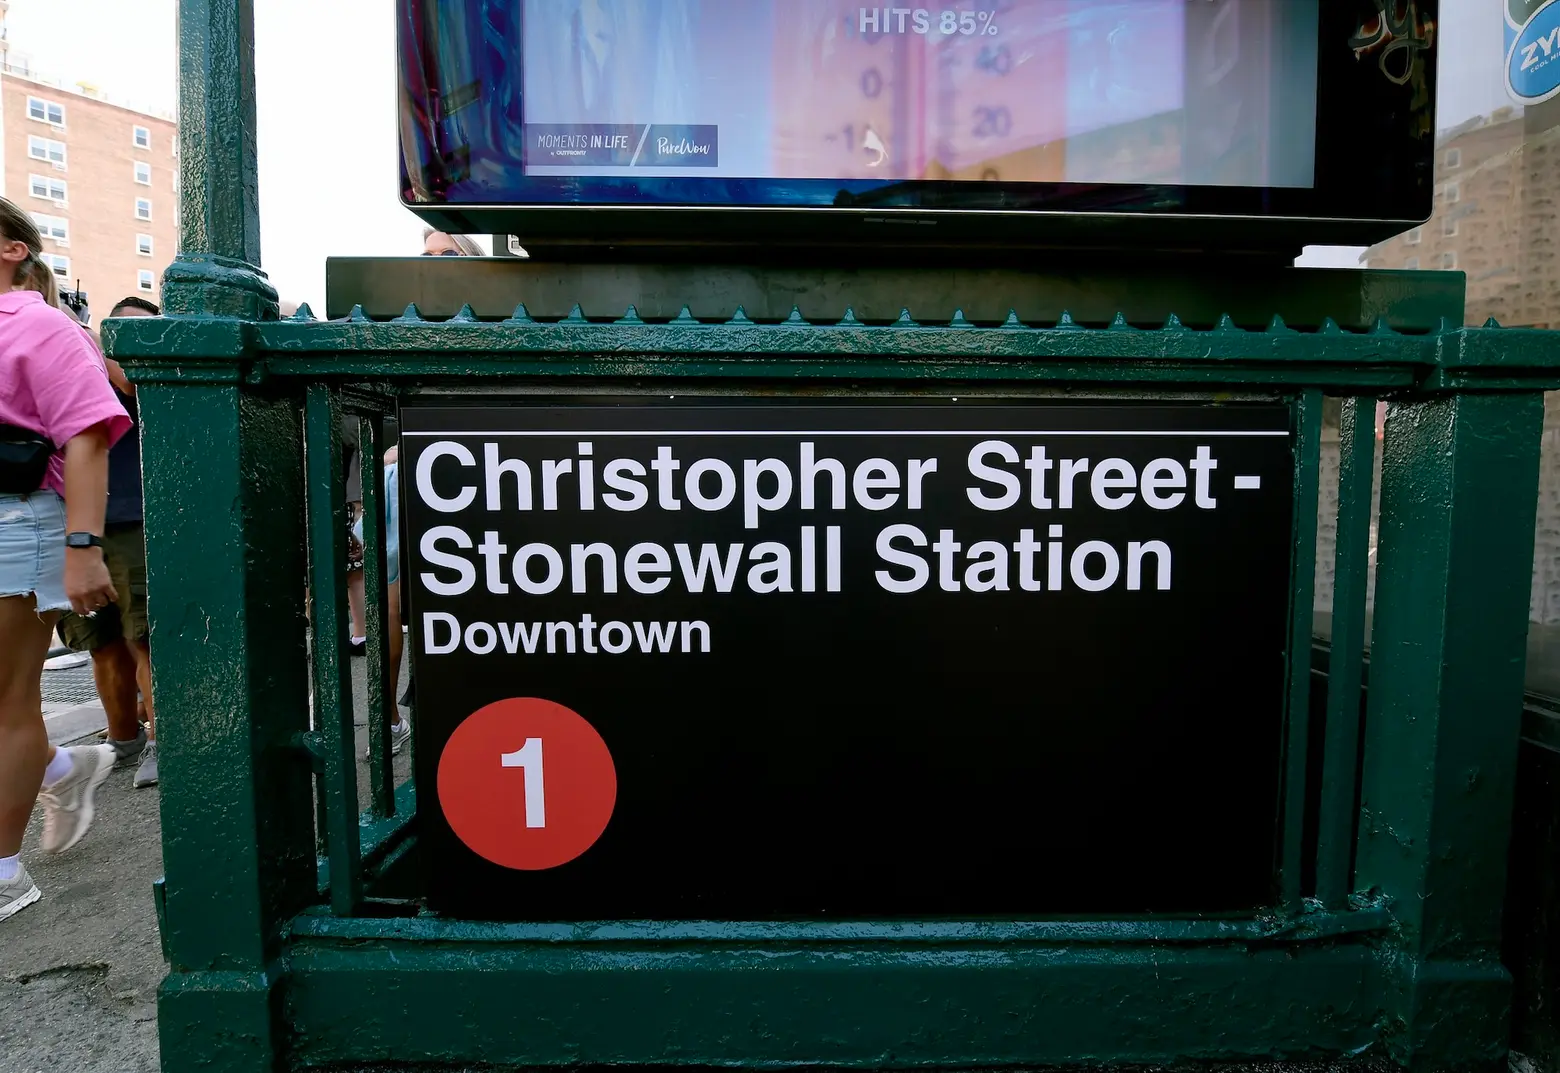 Christopher Street subway station renamed in honor of Stonewall